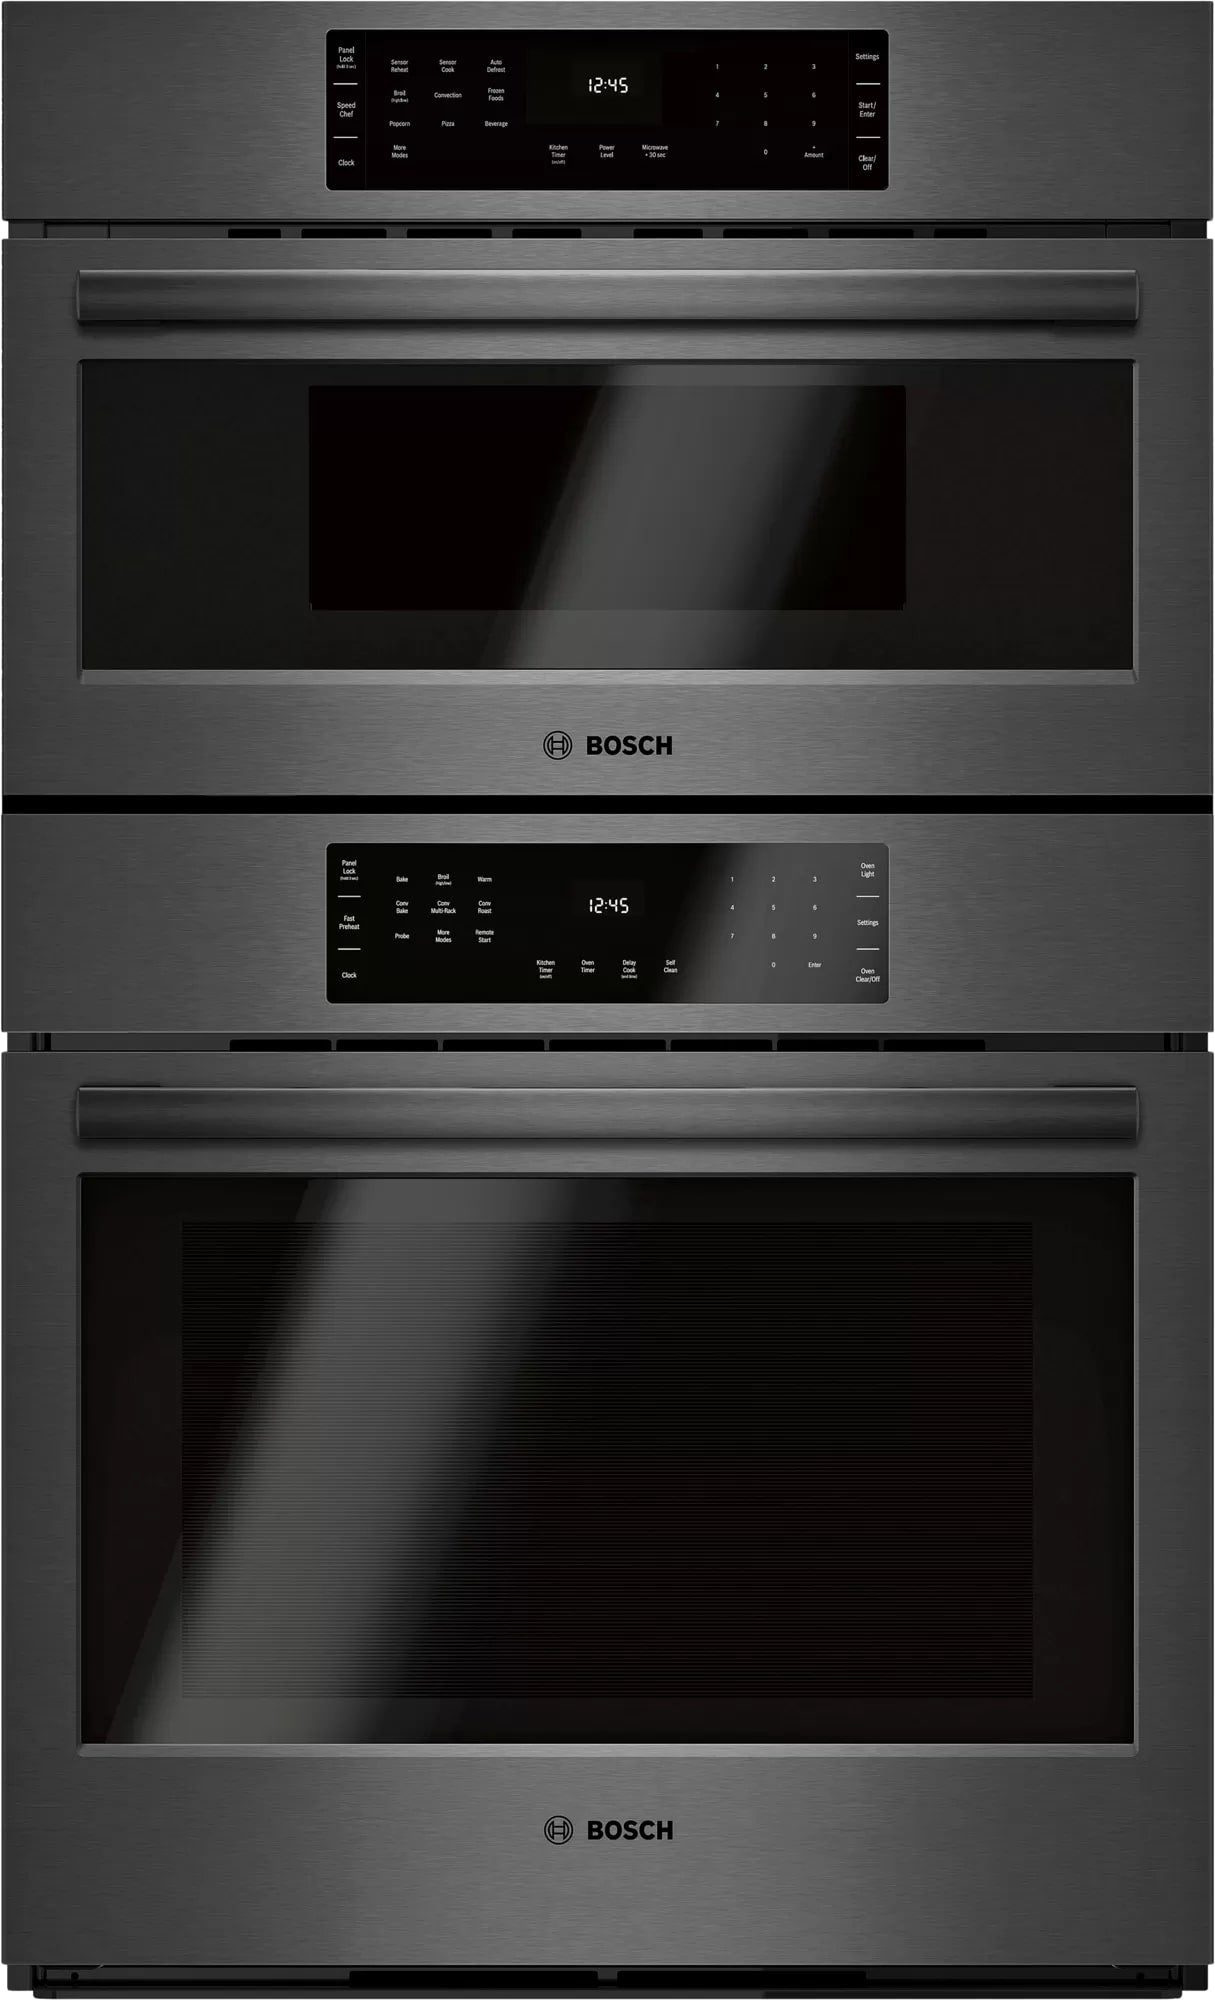 Bosch - 6.2 cu. ft Combination Wall Oven in Black Stainless - HBL8743UC